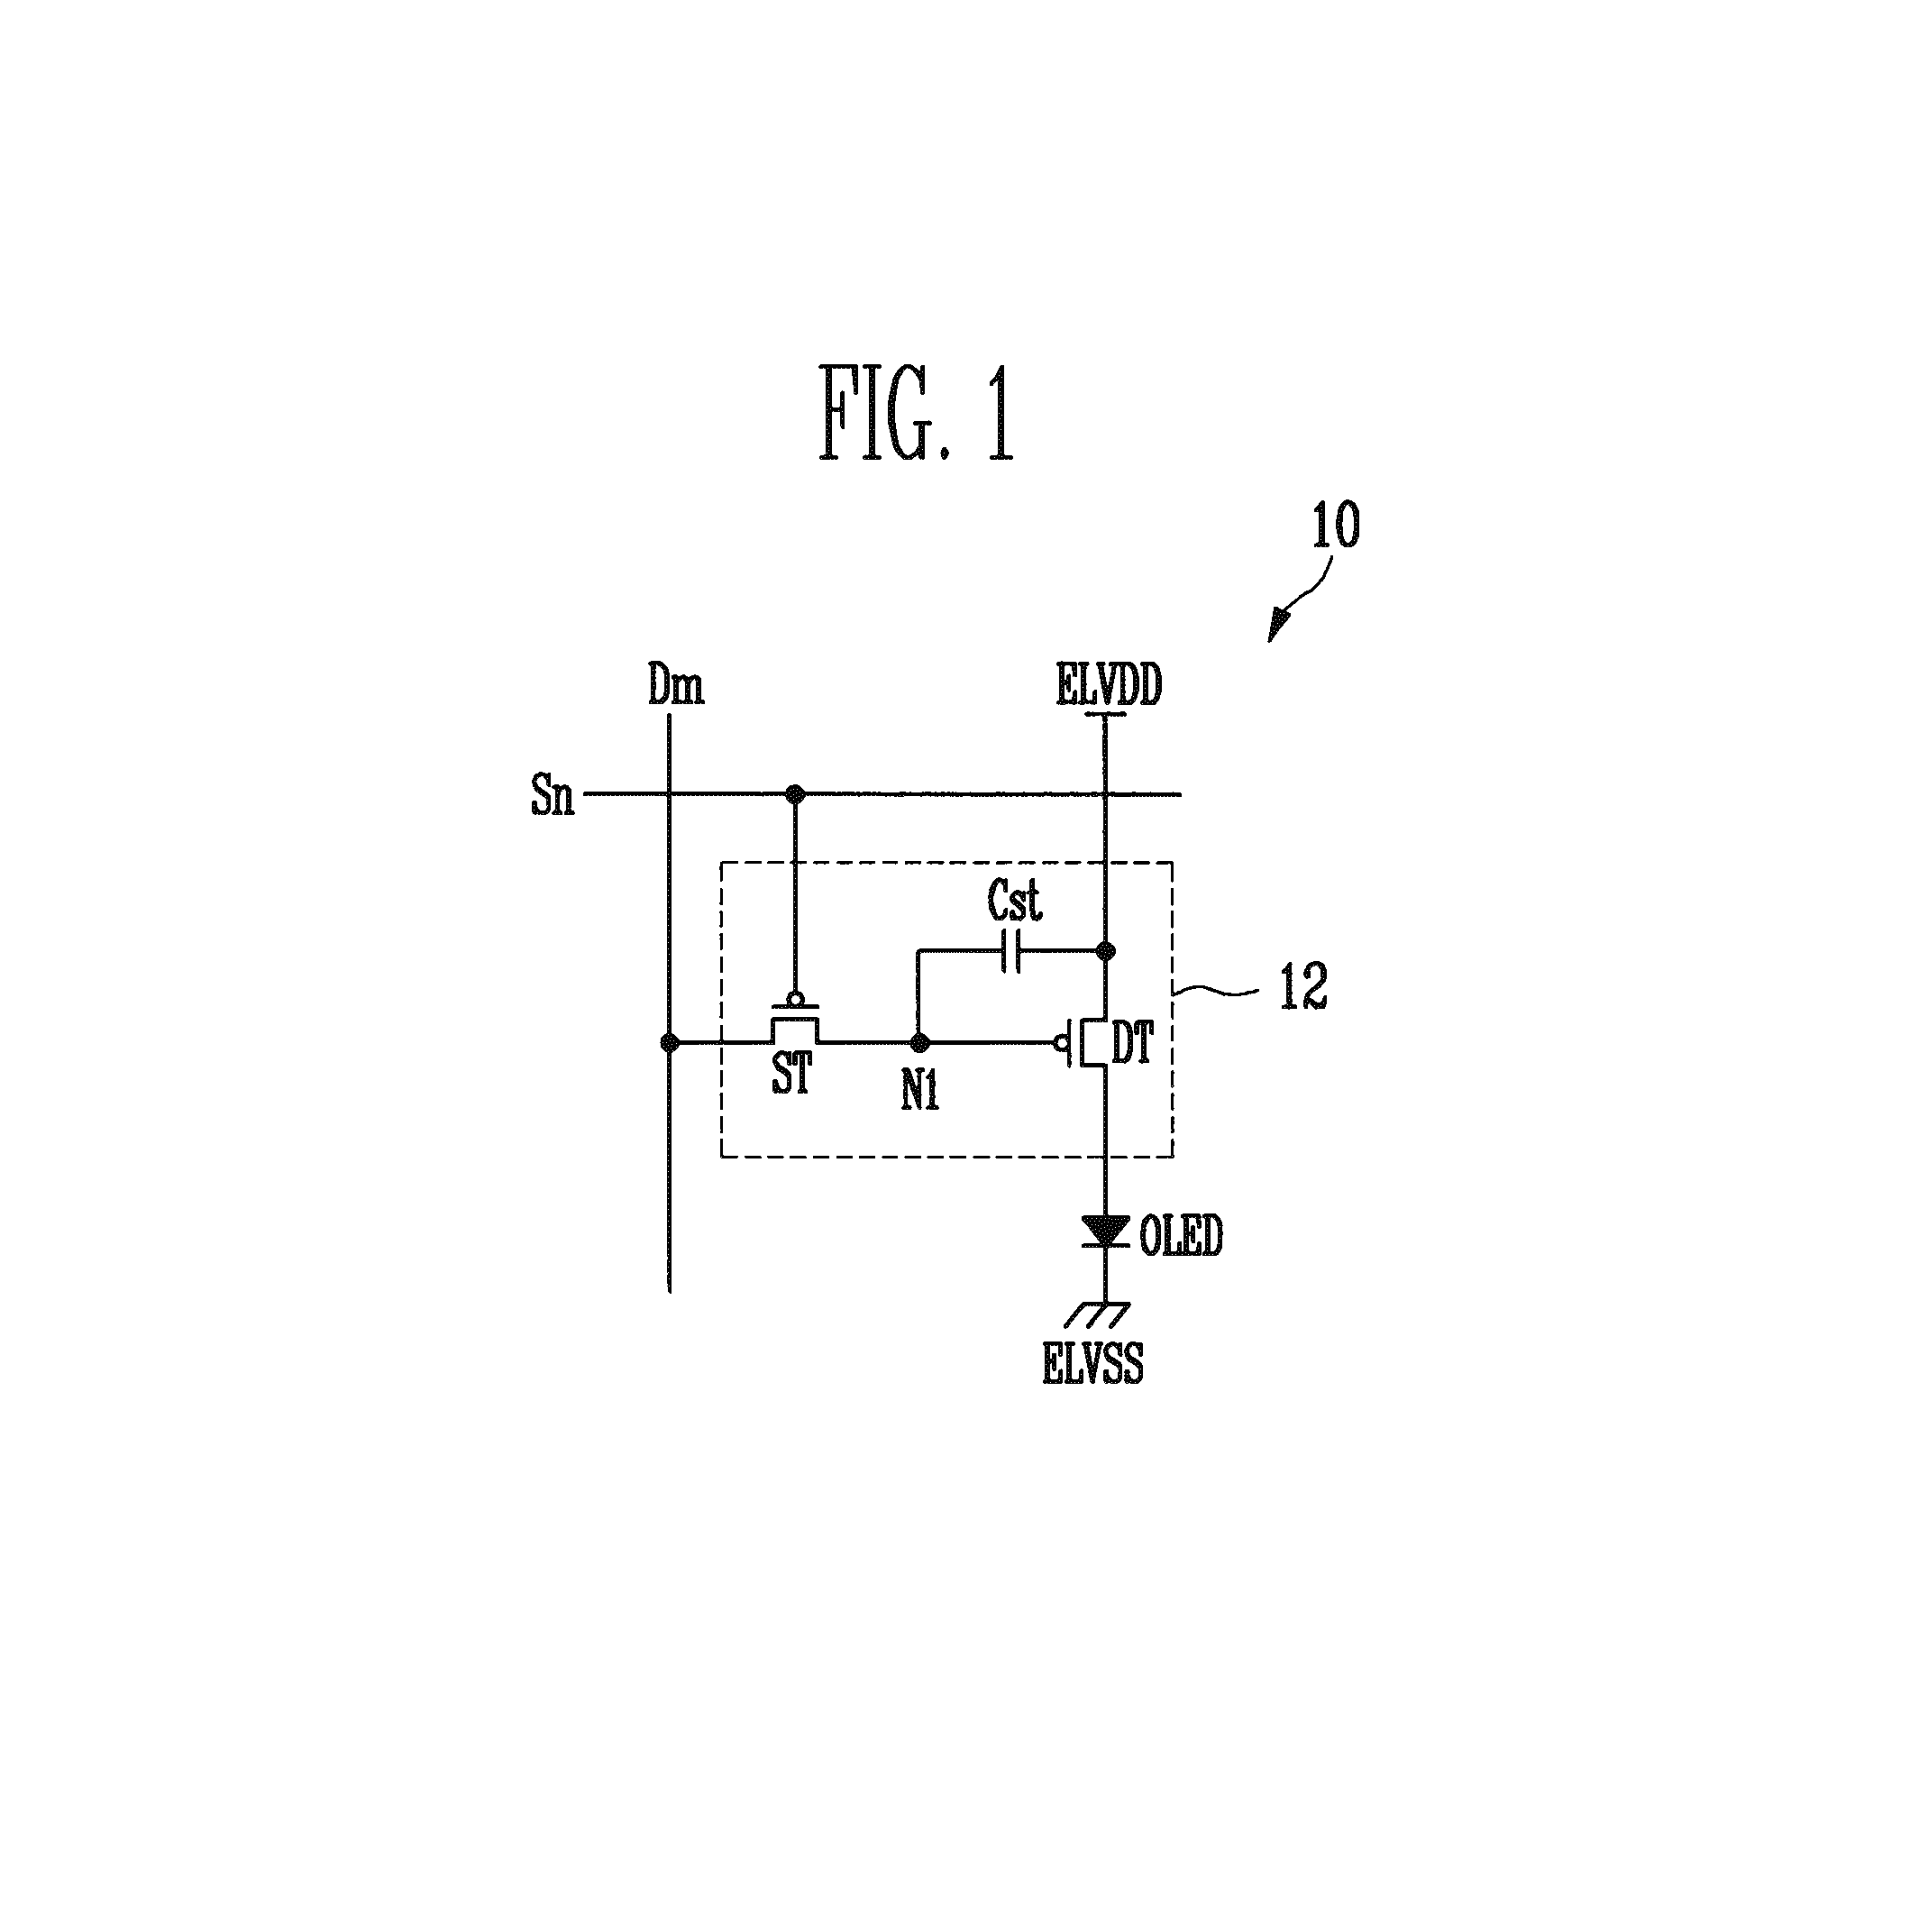 Mother substrate of organic light emitting displays capable of sheet unit testing and method of sheet unit testing